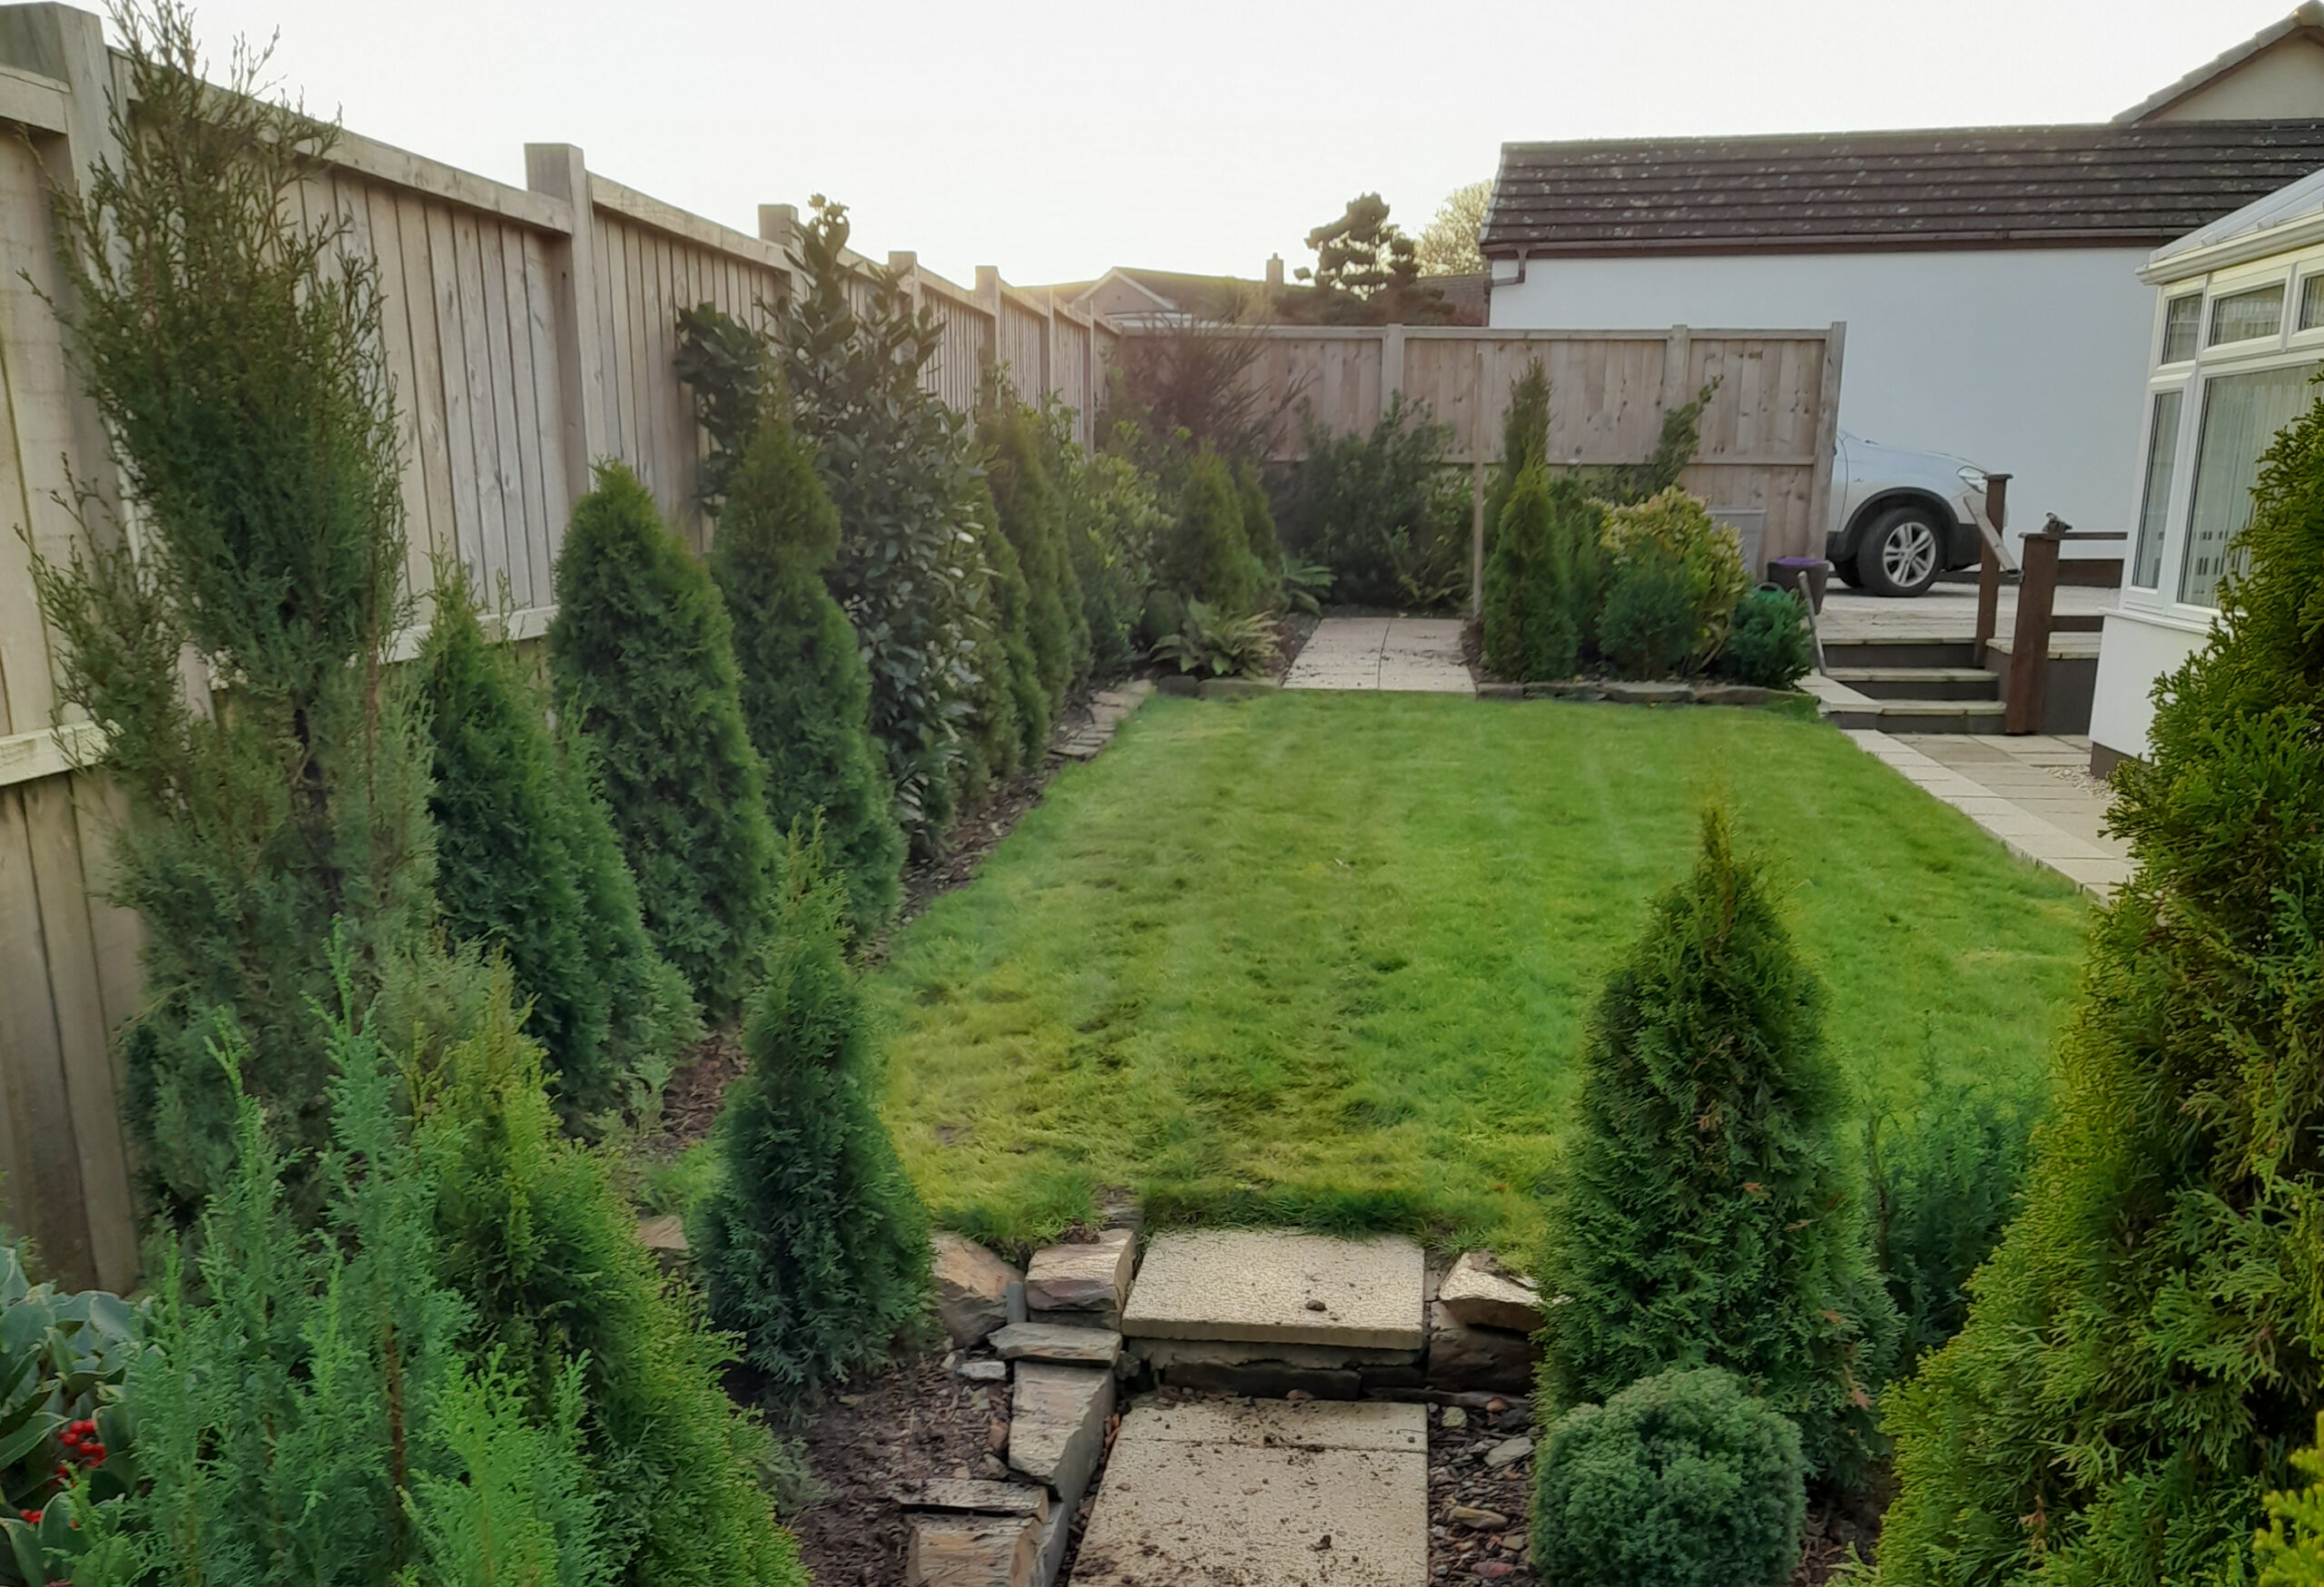 Landscaped garden with tree planting in the border